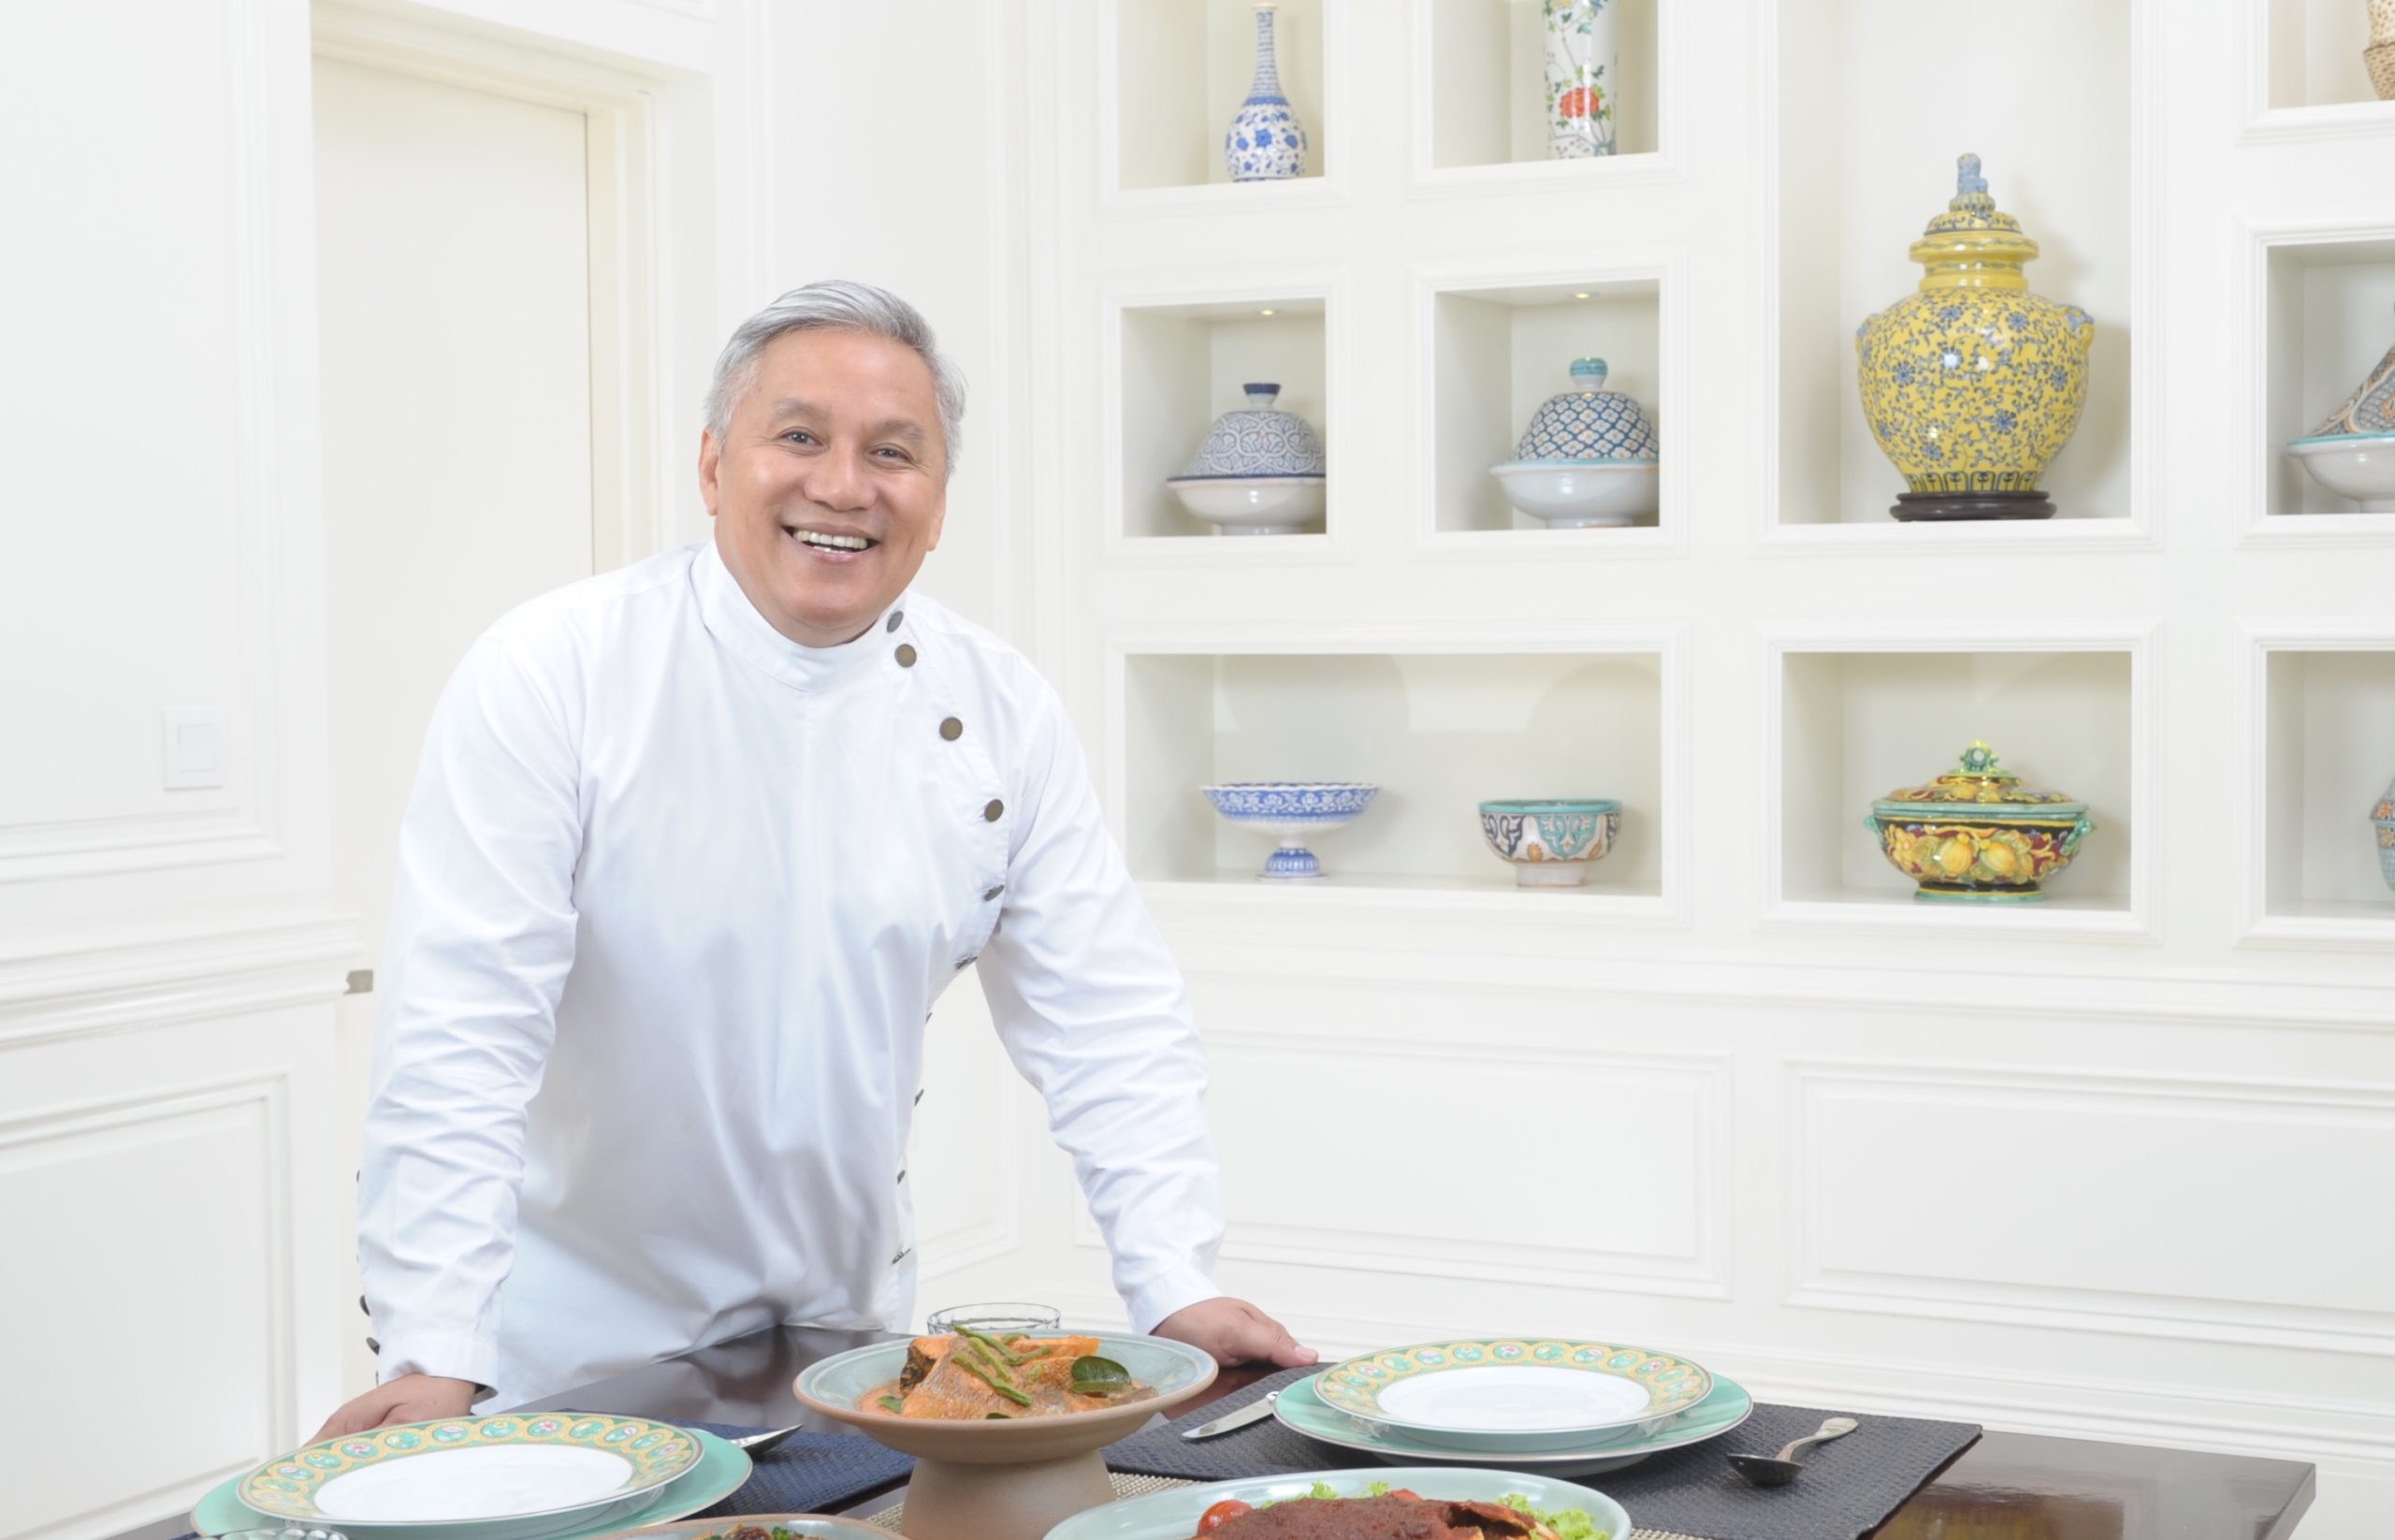 Malaysian Chef Wan has created a limited edition menu for Singapore restaurant Penang Culture